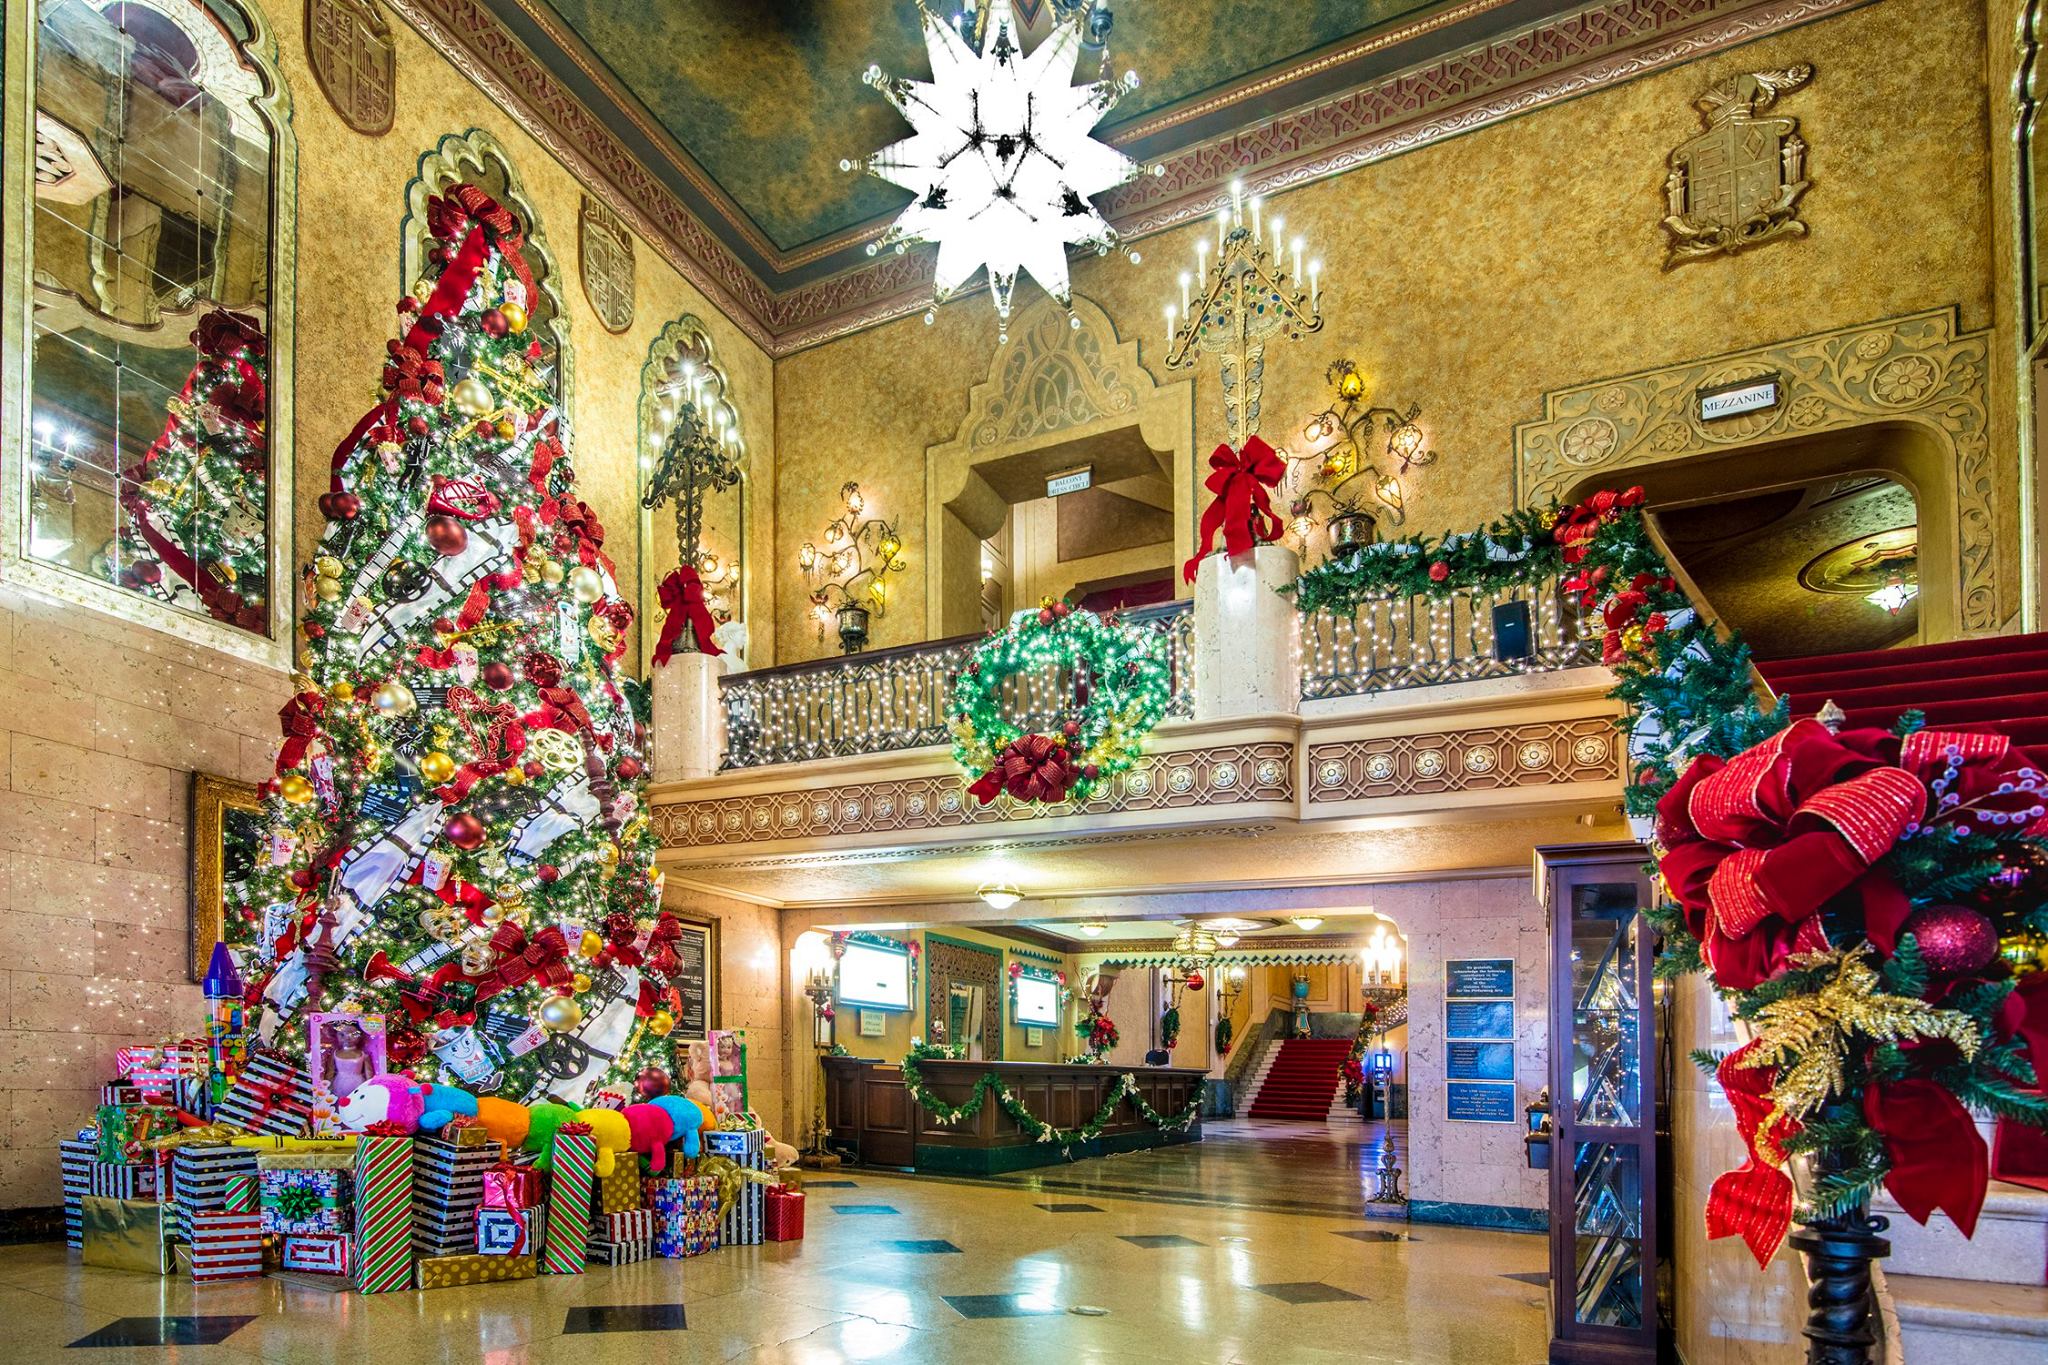 Christmas at the Alabama Theatre Your ultimate guide to the Alabama Theatre's holiday film series this December